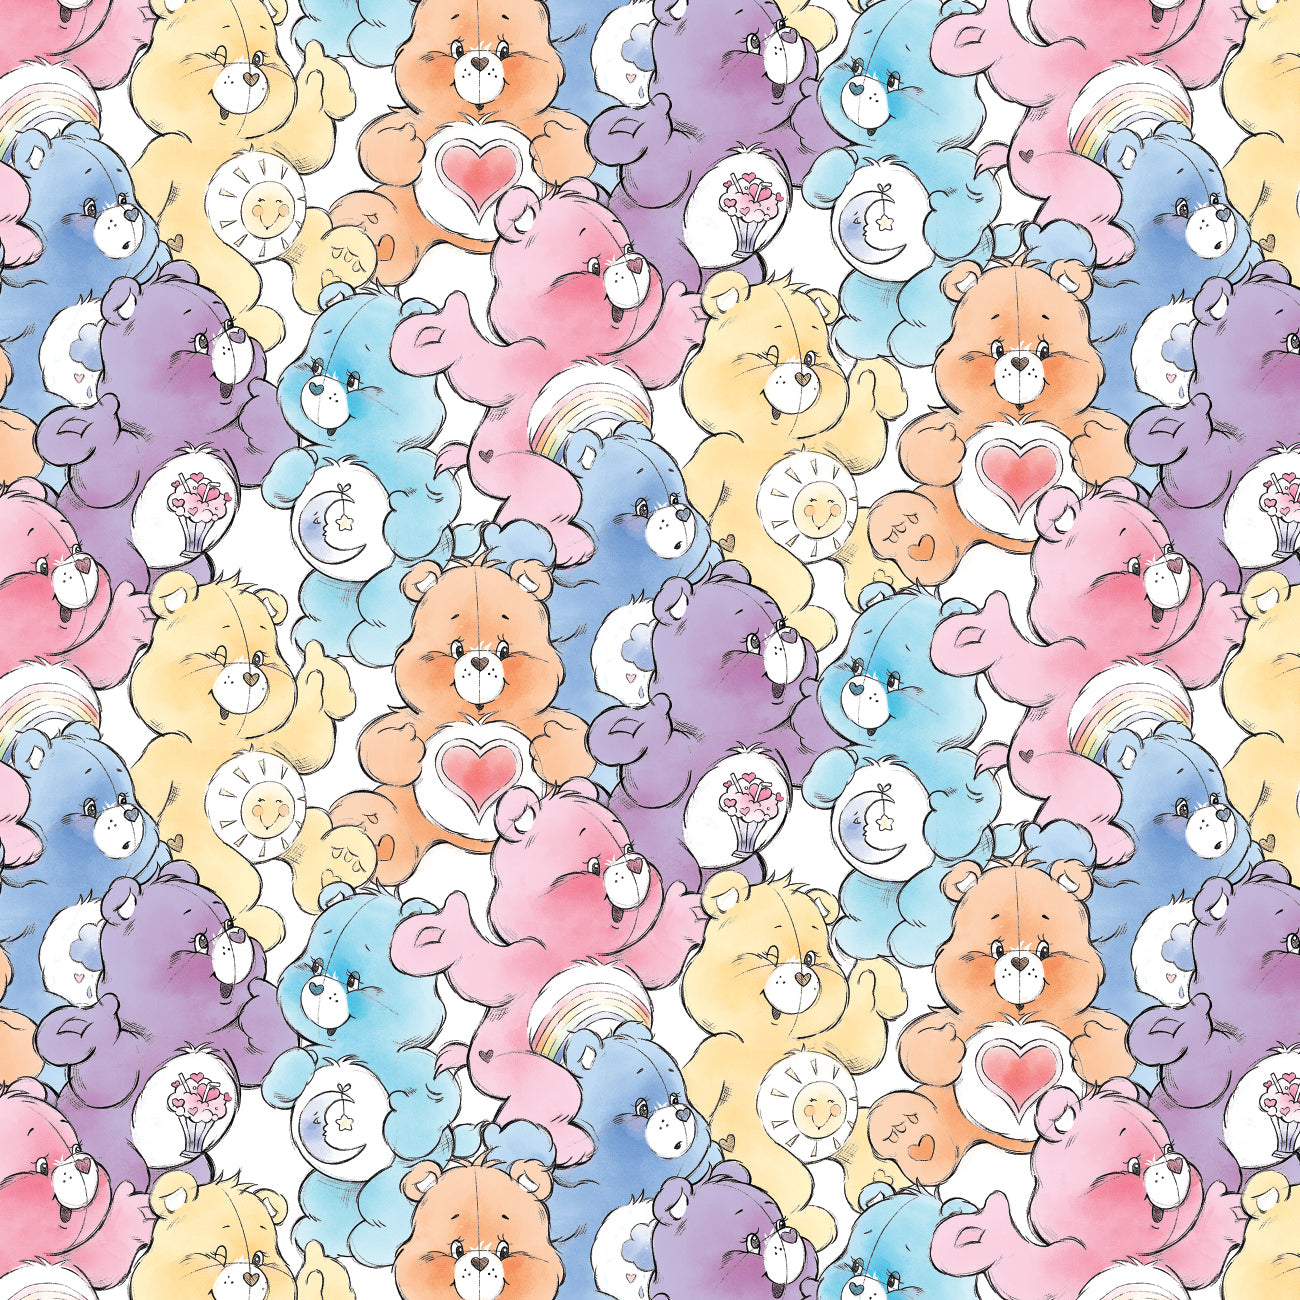 Care Bears Sketch Art Collection-Sketched Care Bears Packed-Multi-100% Cotton-44011002-01